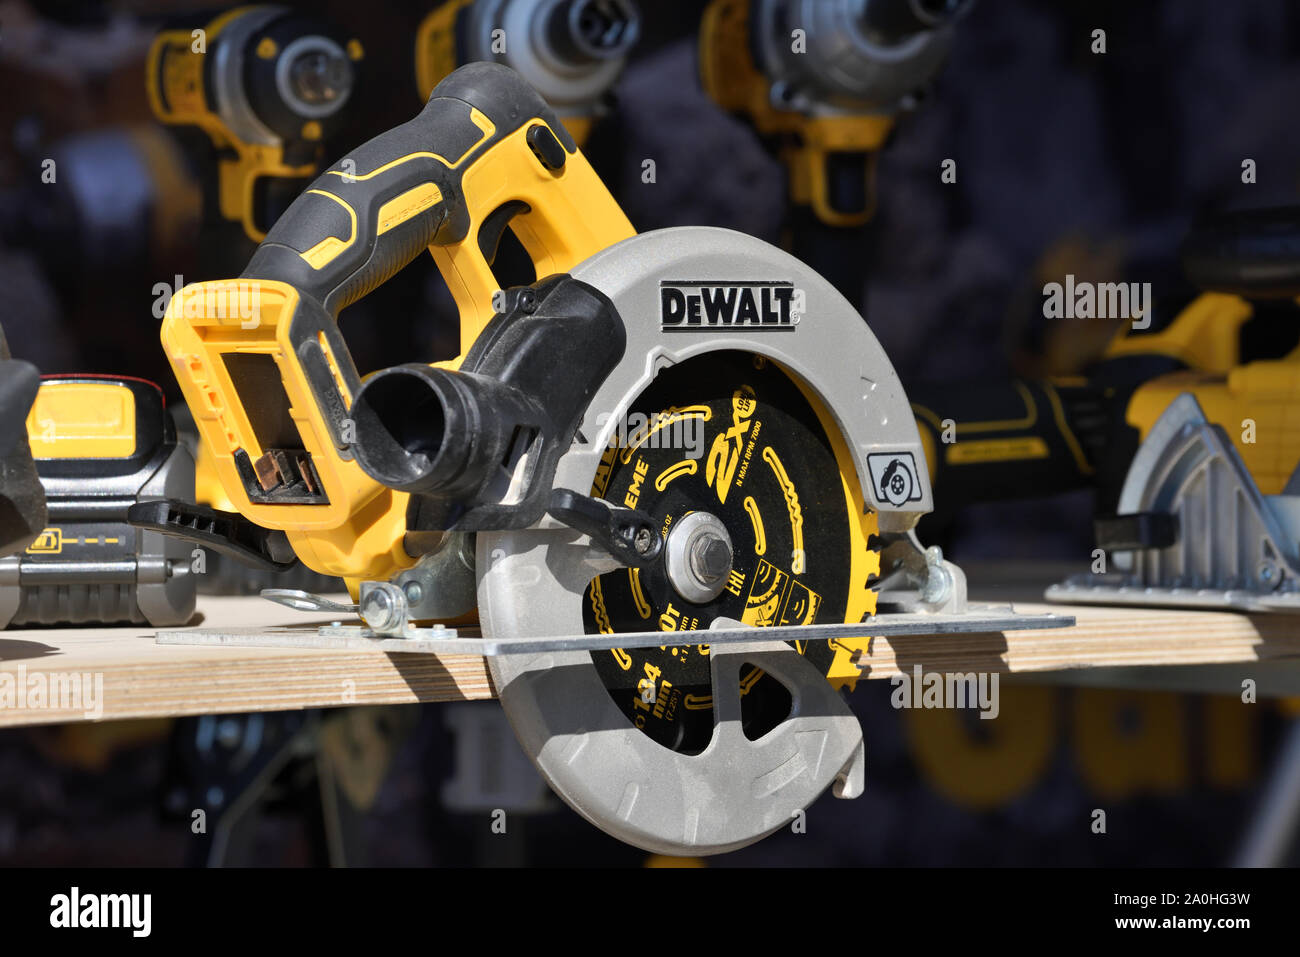 Kaunas, Lithuania - April 04: DeWalt power tools in Kaunas on April 04,  2019. DeWalt is an American worldwide brand of power tools and hand tools  for Stock Photo - Alamy